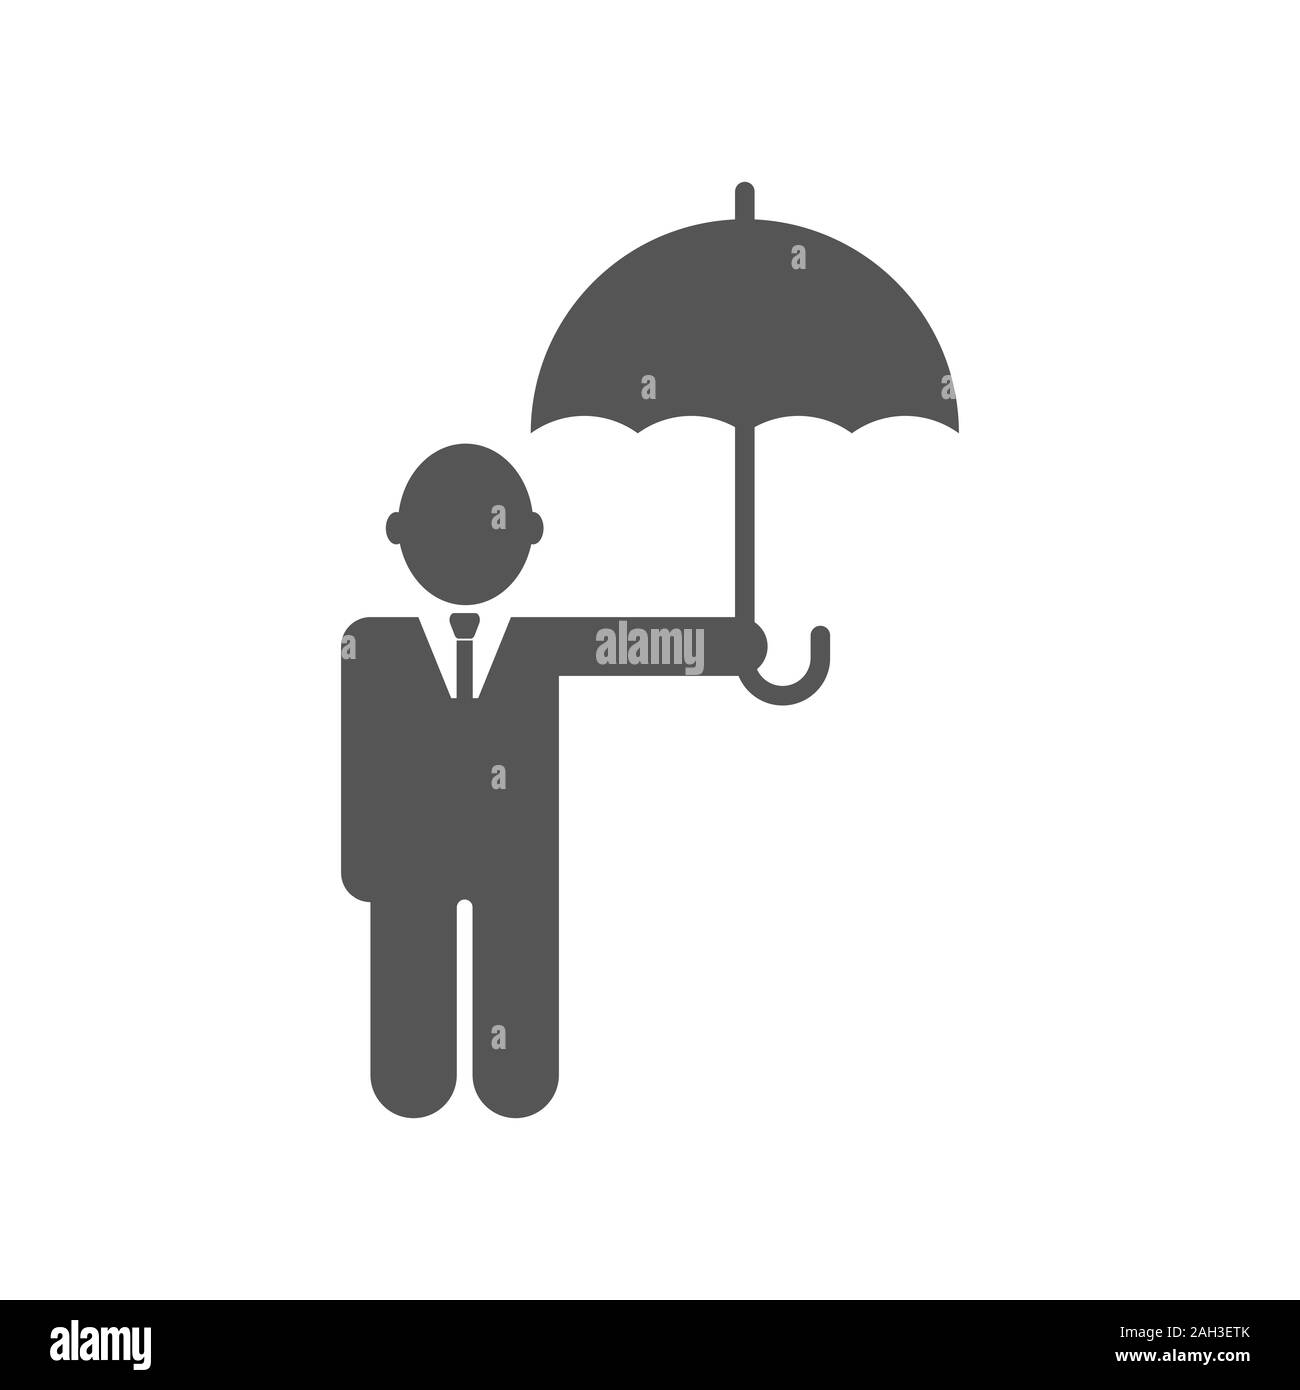 Man with umbrella vector icon on white background. Flat vector man with umbrella icon symbol sign. Insurance concept with insurance agent. EPS 10 Stock Vector